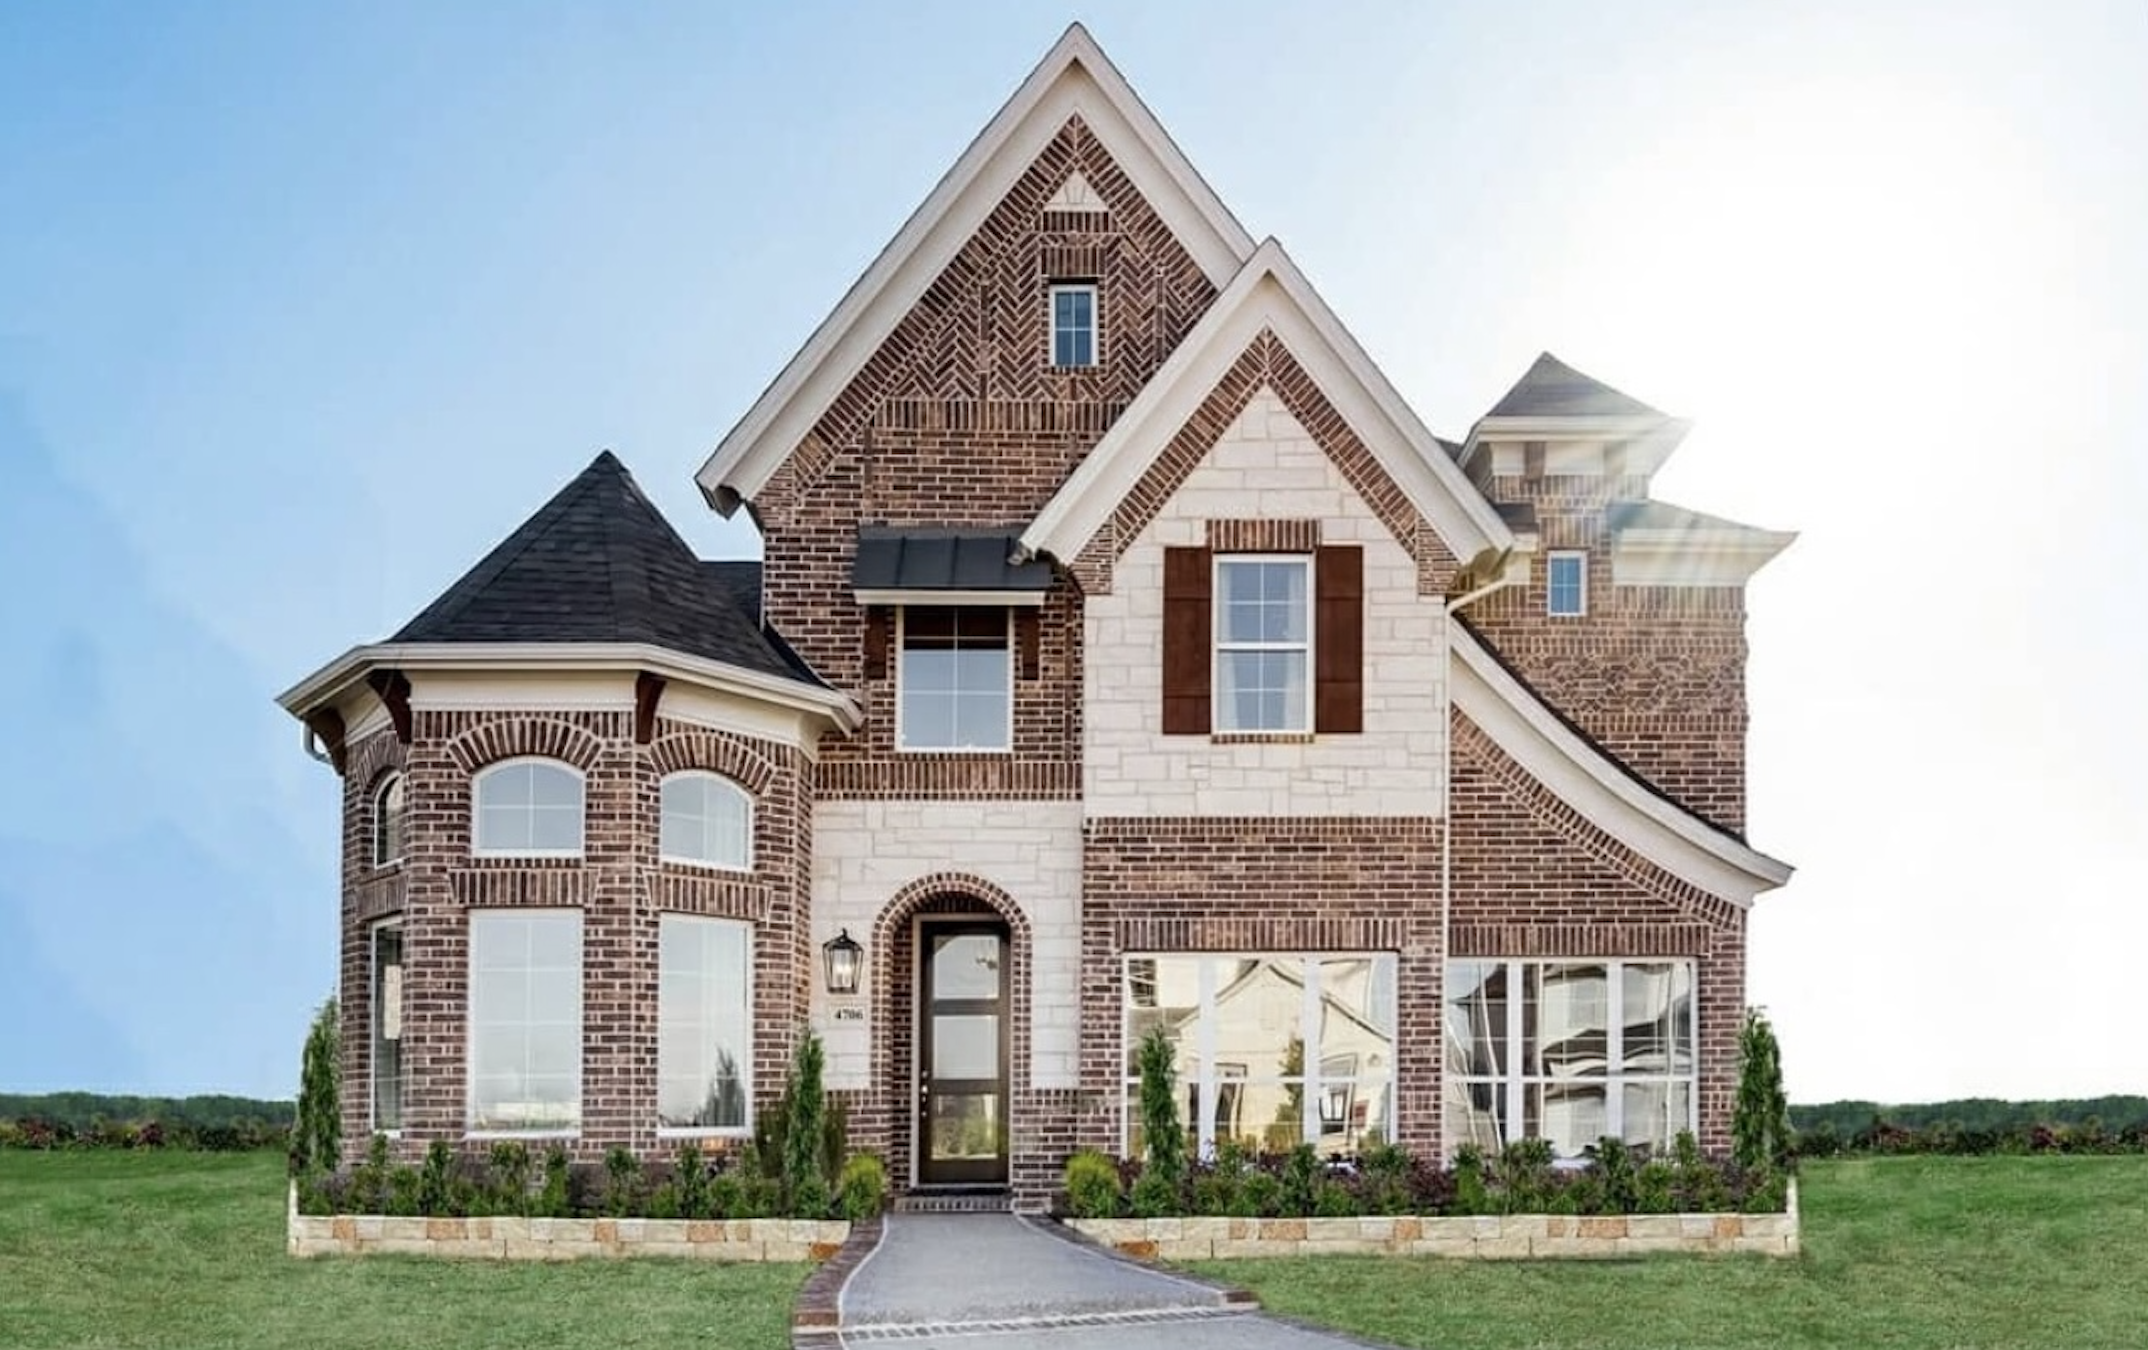 New two-story brick house in new home communities in Mansfield, TX, with a landscaped front yard.